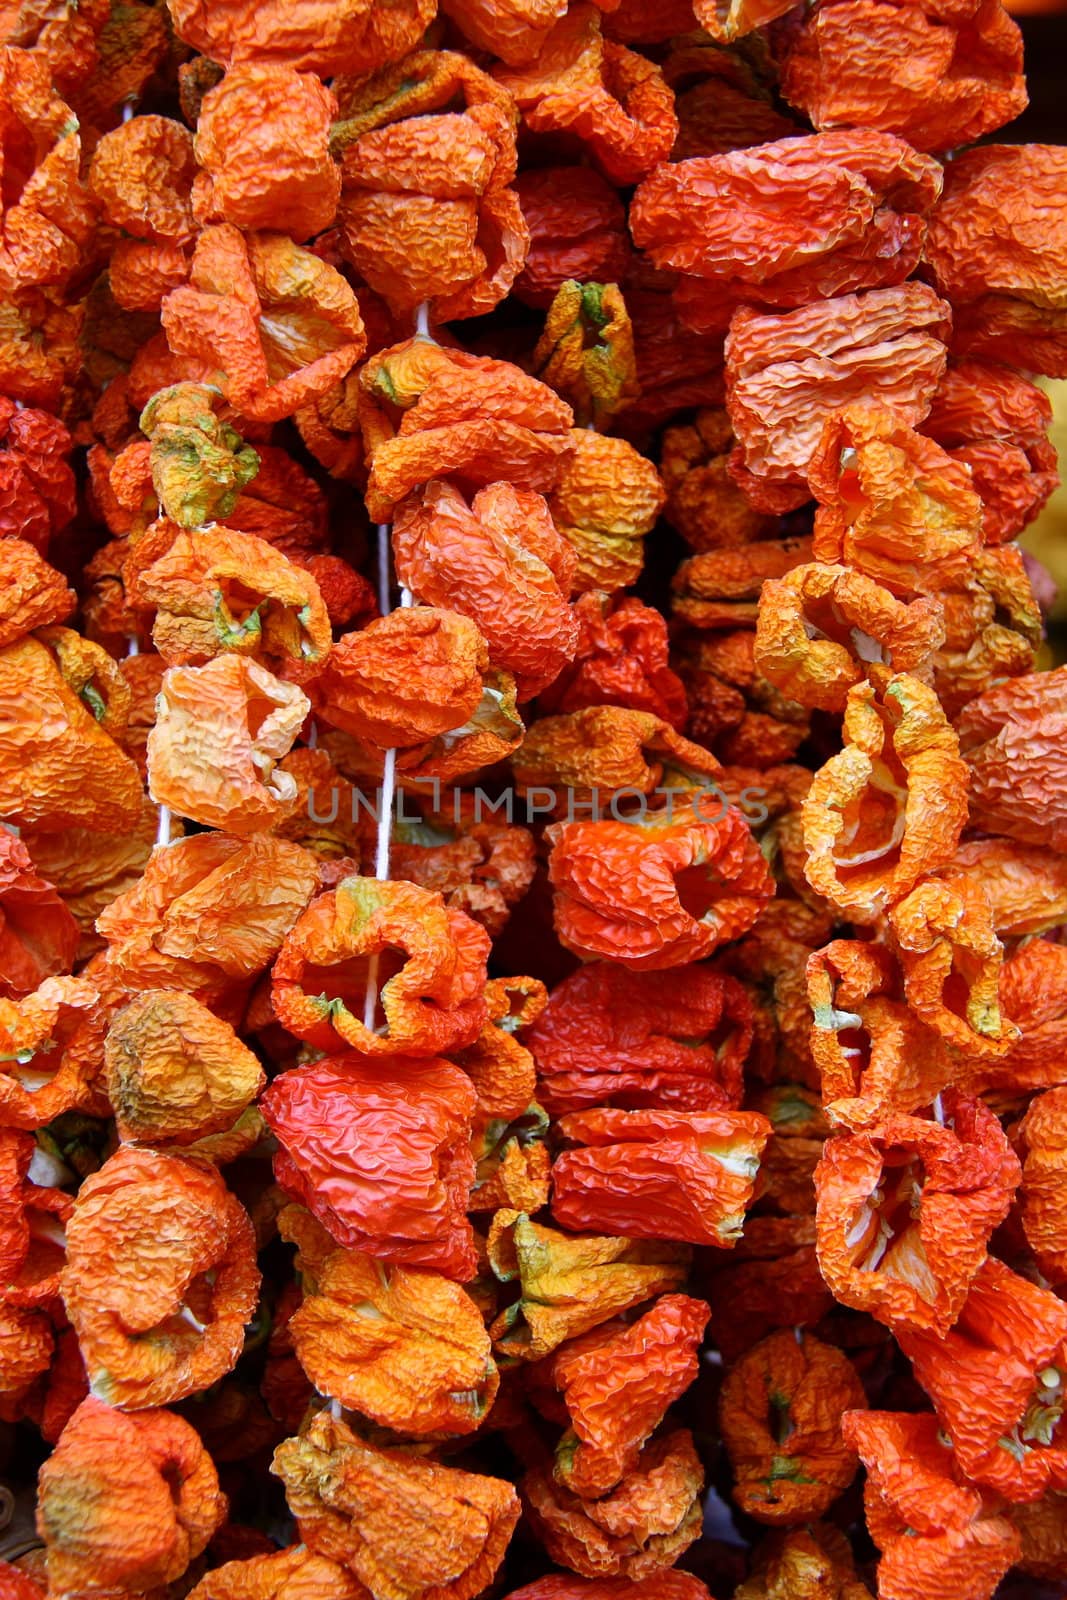 red dry peppers on rope for cooking, its made in Turkey and shops sell these in bazaars